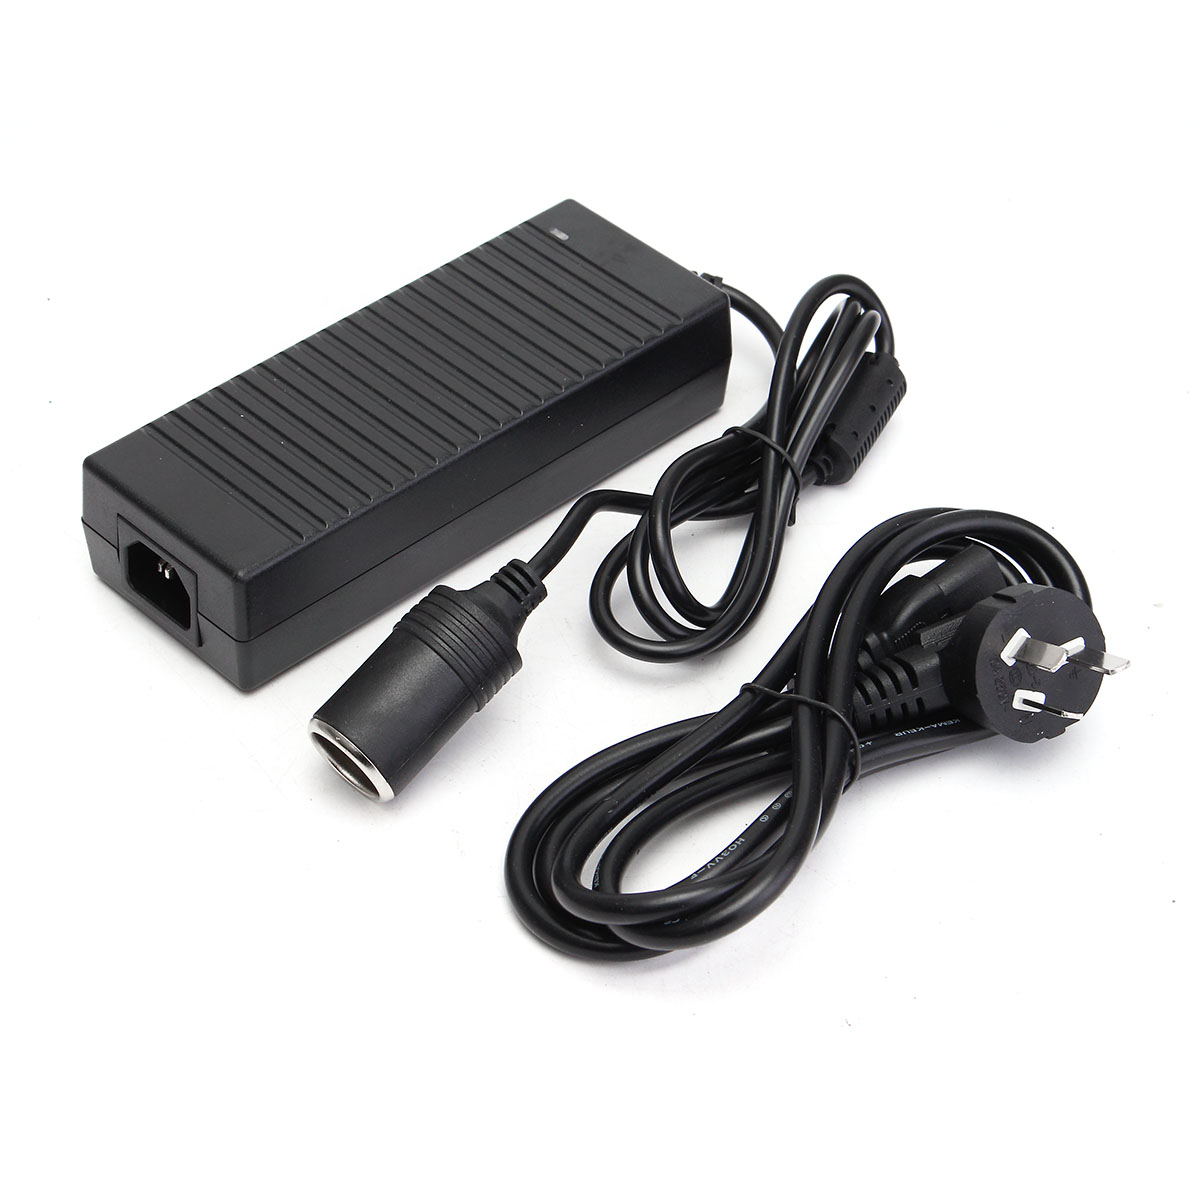 

120W 10A AC 220V To DC 12V Car Charger Cigarette Lighter Inverter Power Adapter Coventer Charger